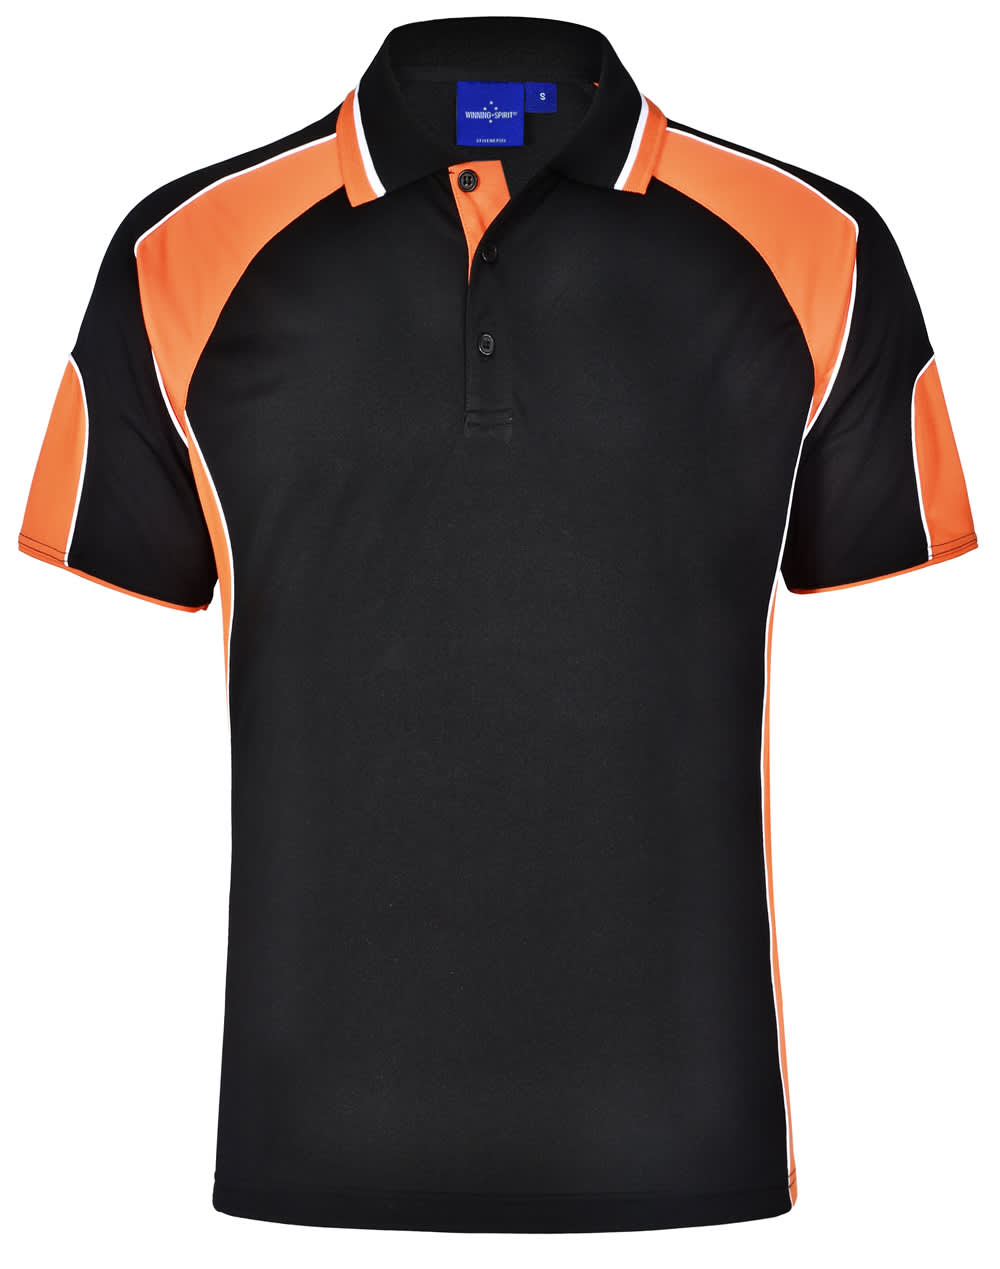 Mens CoolDry Contrast Short Sleeve Polo with Sleeve Panels PS61 | Black/Orange